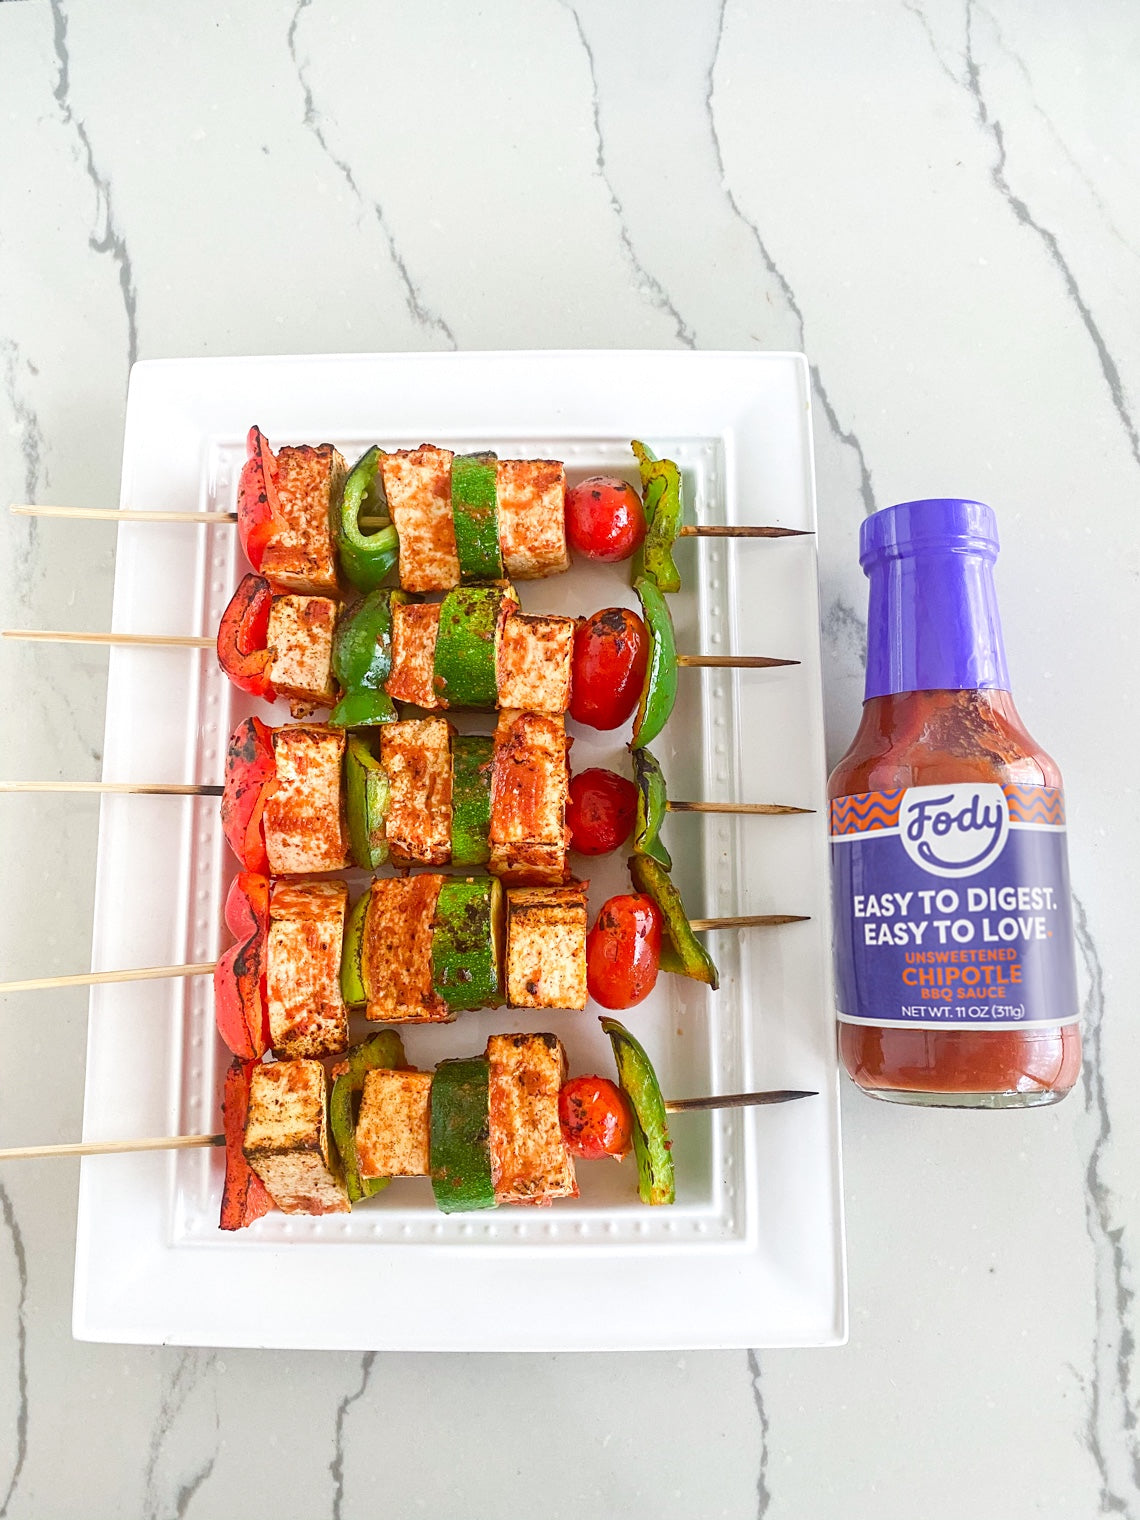 Fody's Chipotle BBQ Skewers with Tofu & Low FODMAP Vegetables